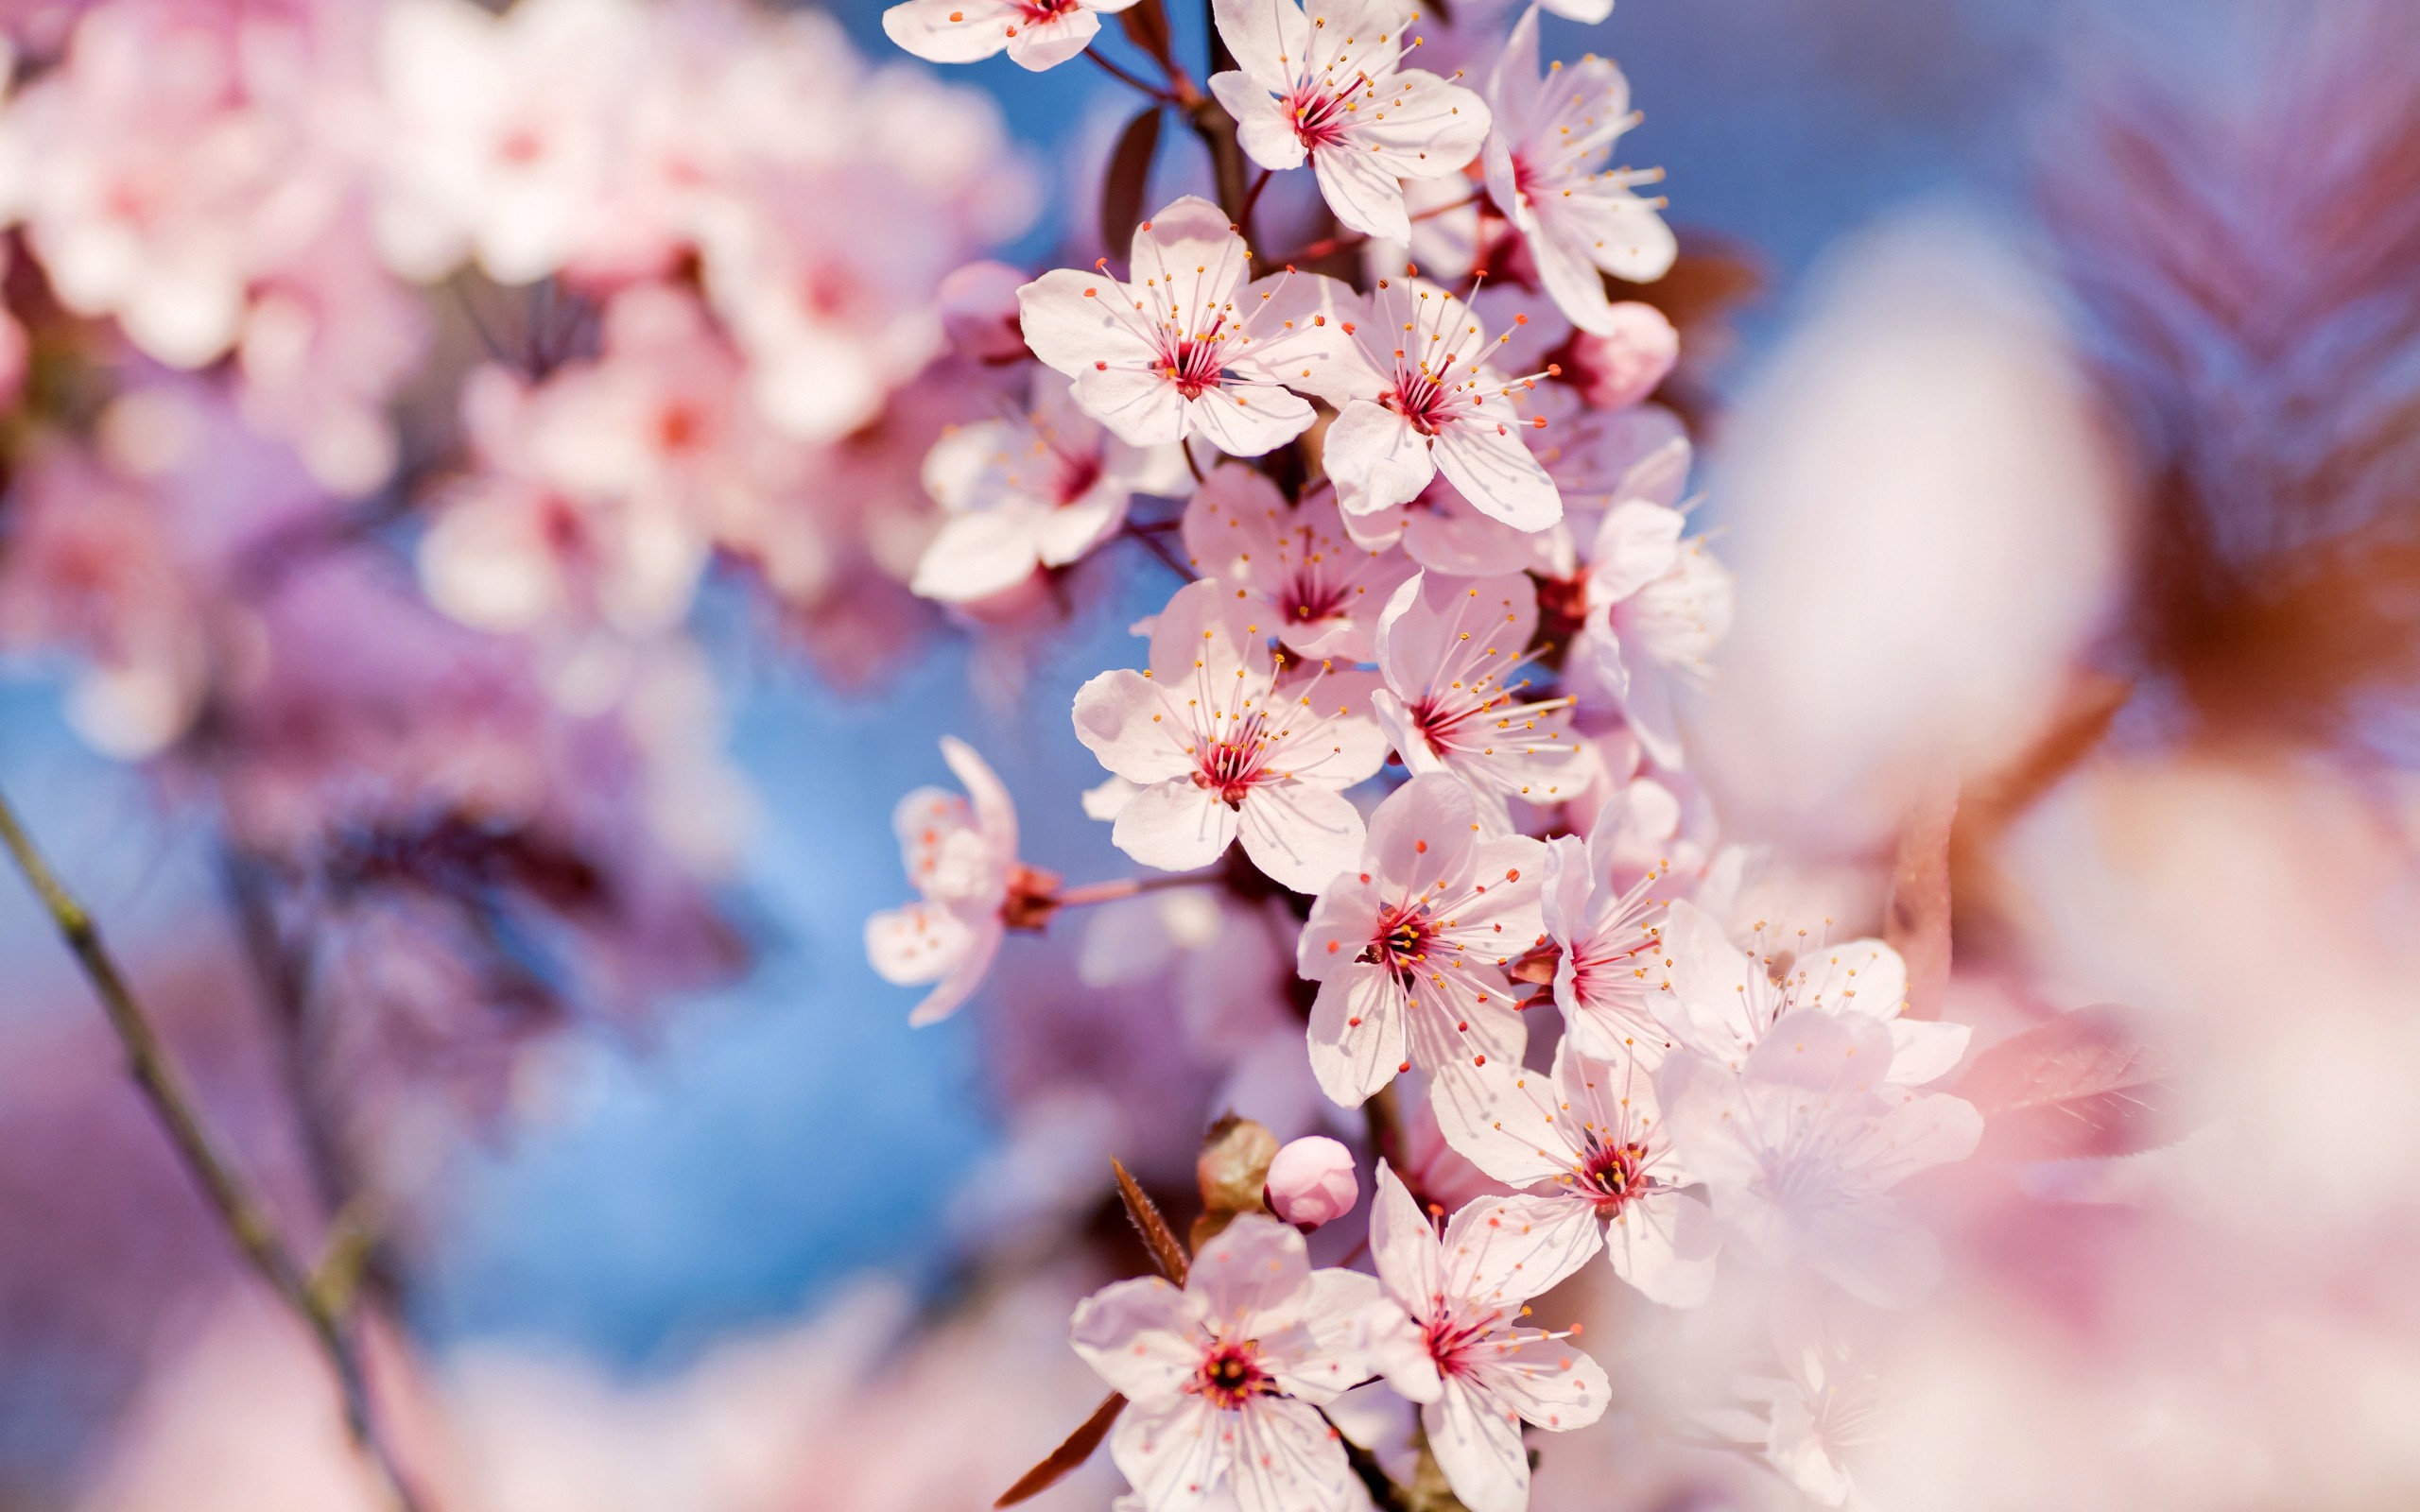 General 2560x1600 nature macro flowers plants pink cherry blossom petals colorful